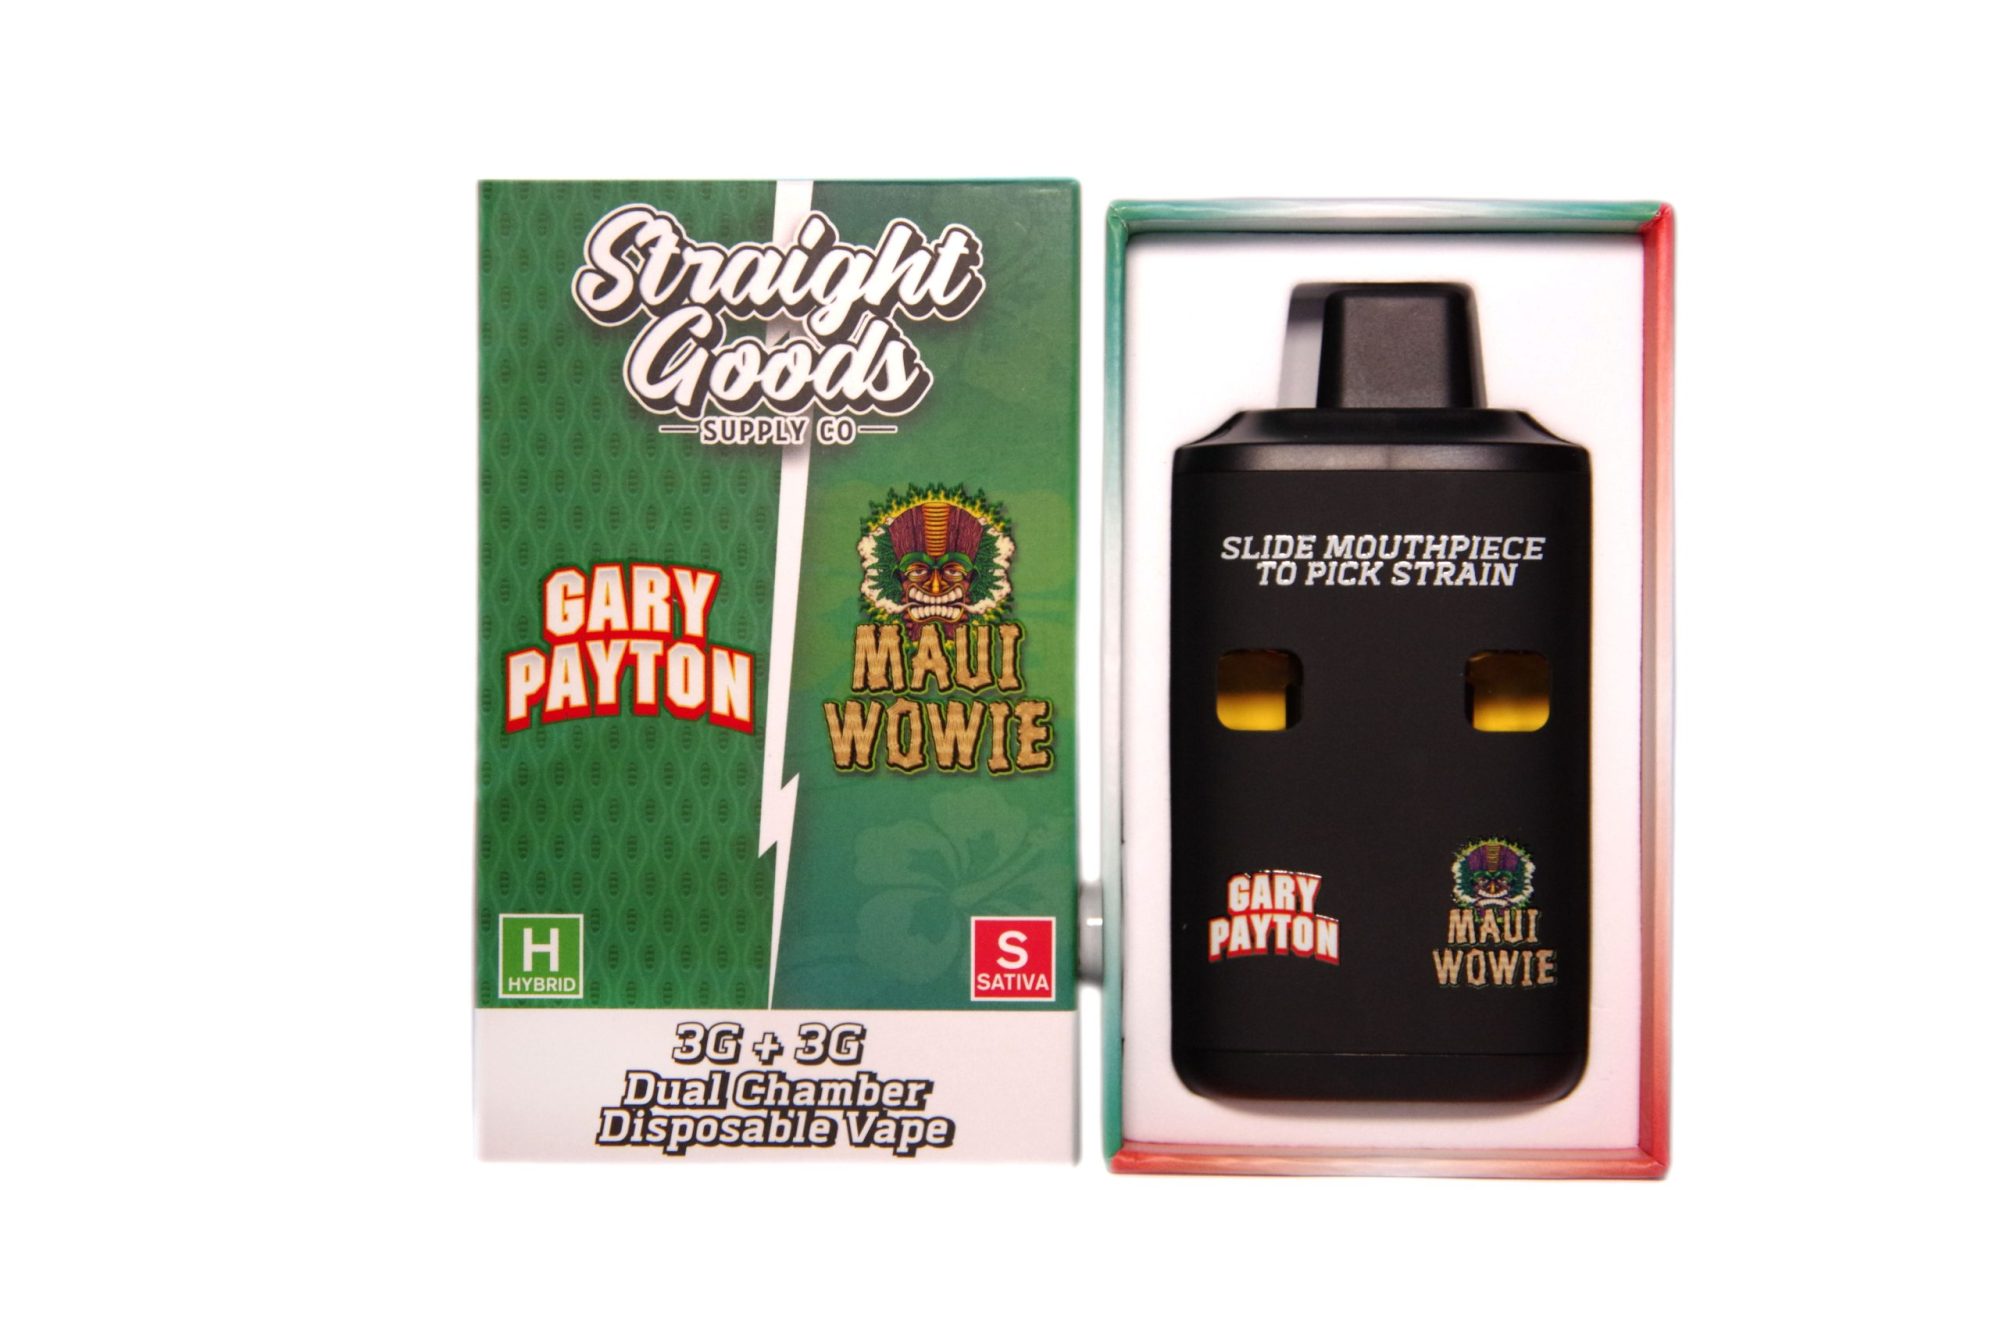 Buy Straight Goods - Dual Chamber Vape - Gary Payton + Maui Wowie (3 Grams + 3 Grams) at Wccannabis Online Shop